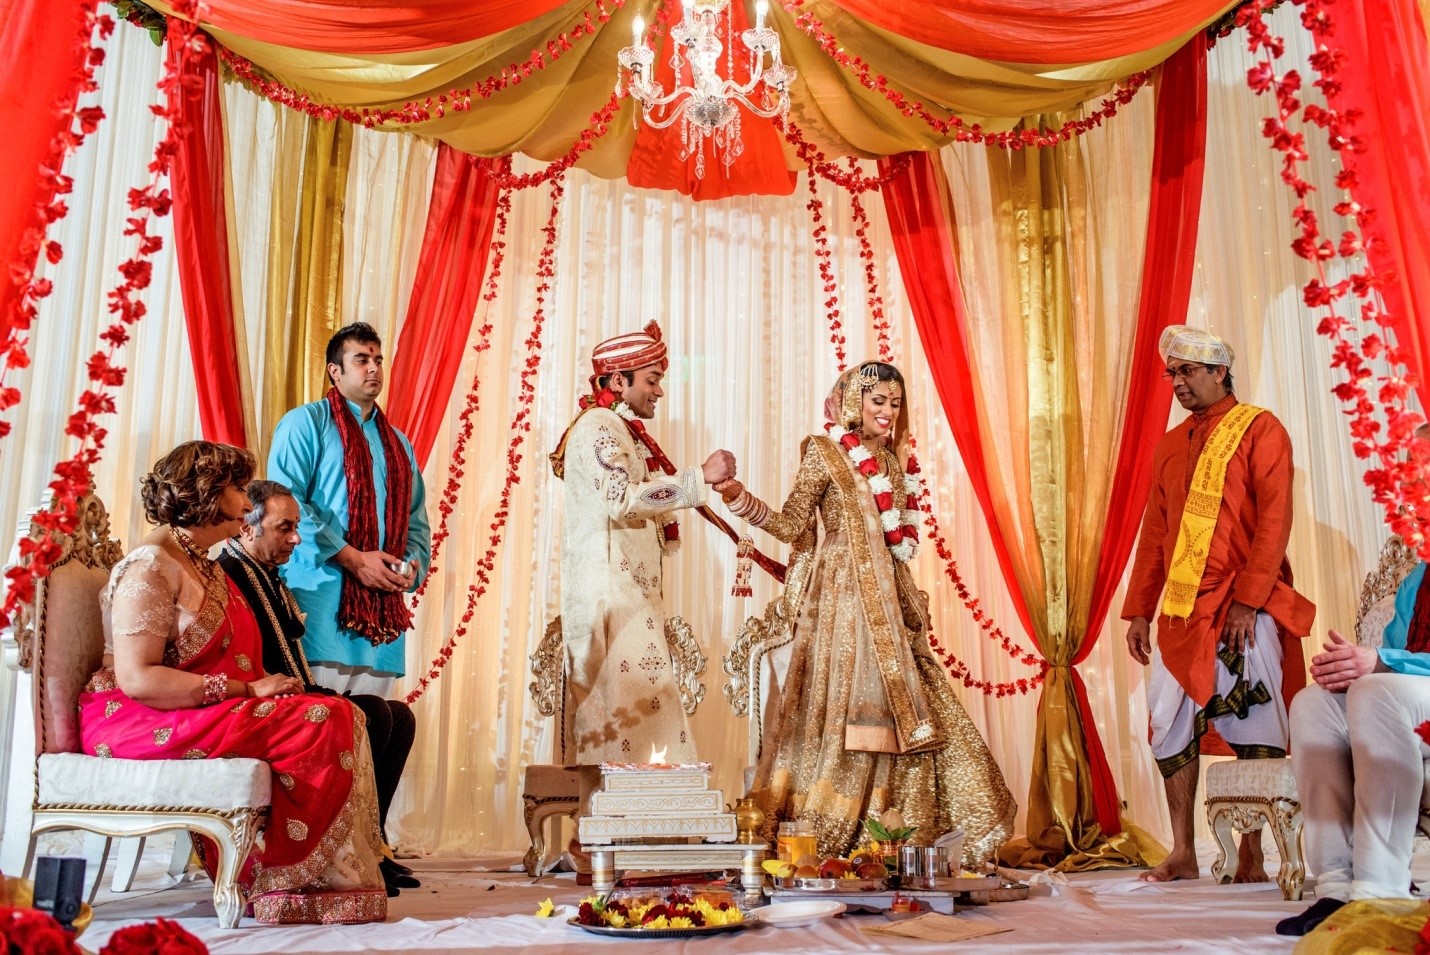 What To Wear To An Indian Wedding: Style Guide For All Ceremonies